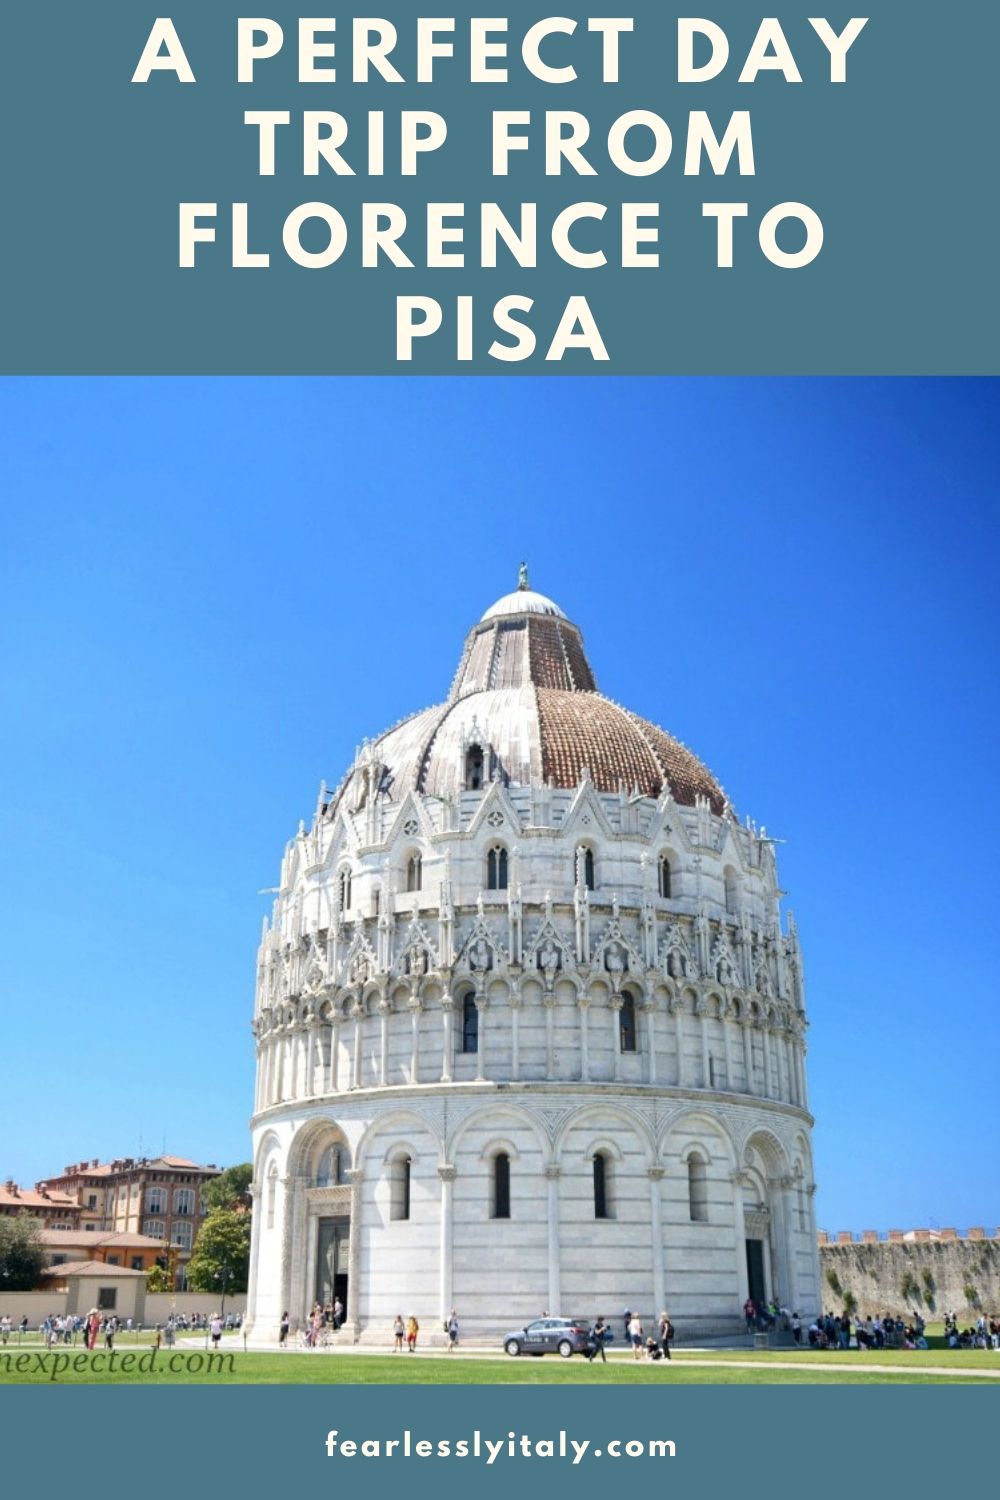 Pinterest image: image of Pisa baptistery with caption reading 'A perfect day trip from Florence to Pisa'